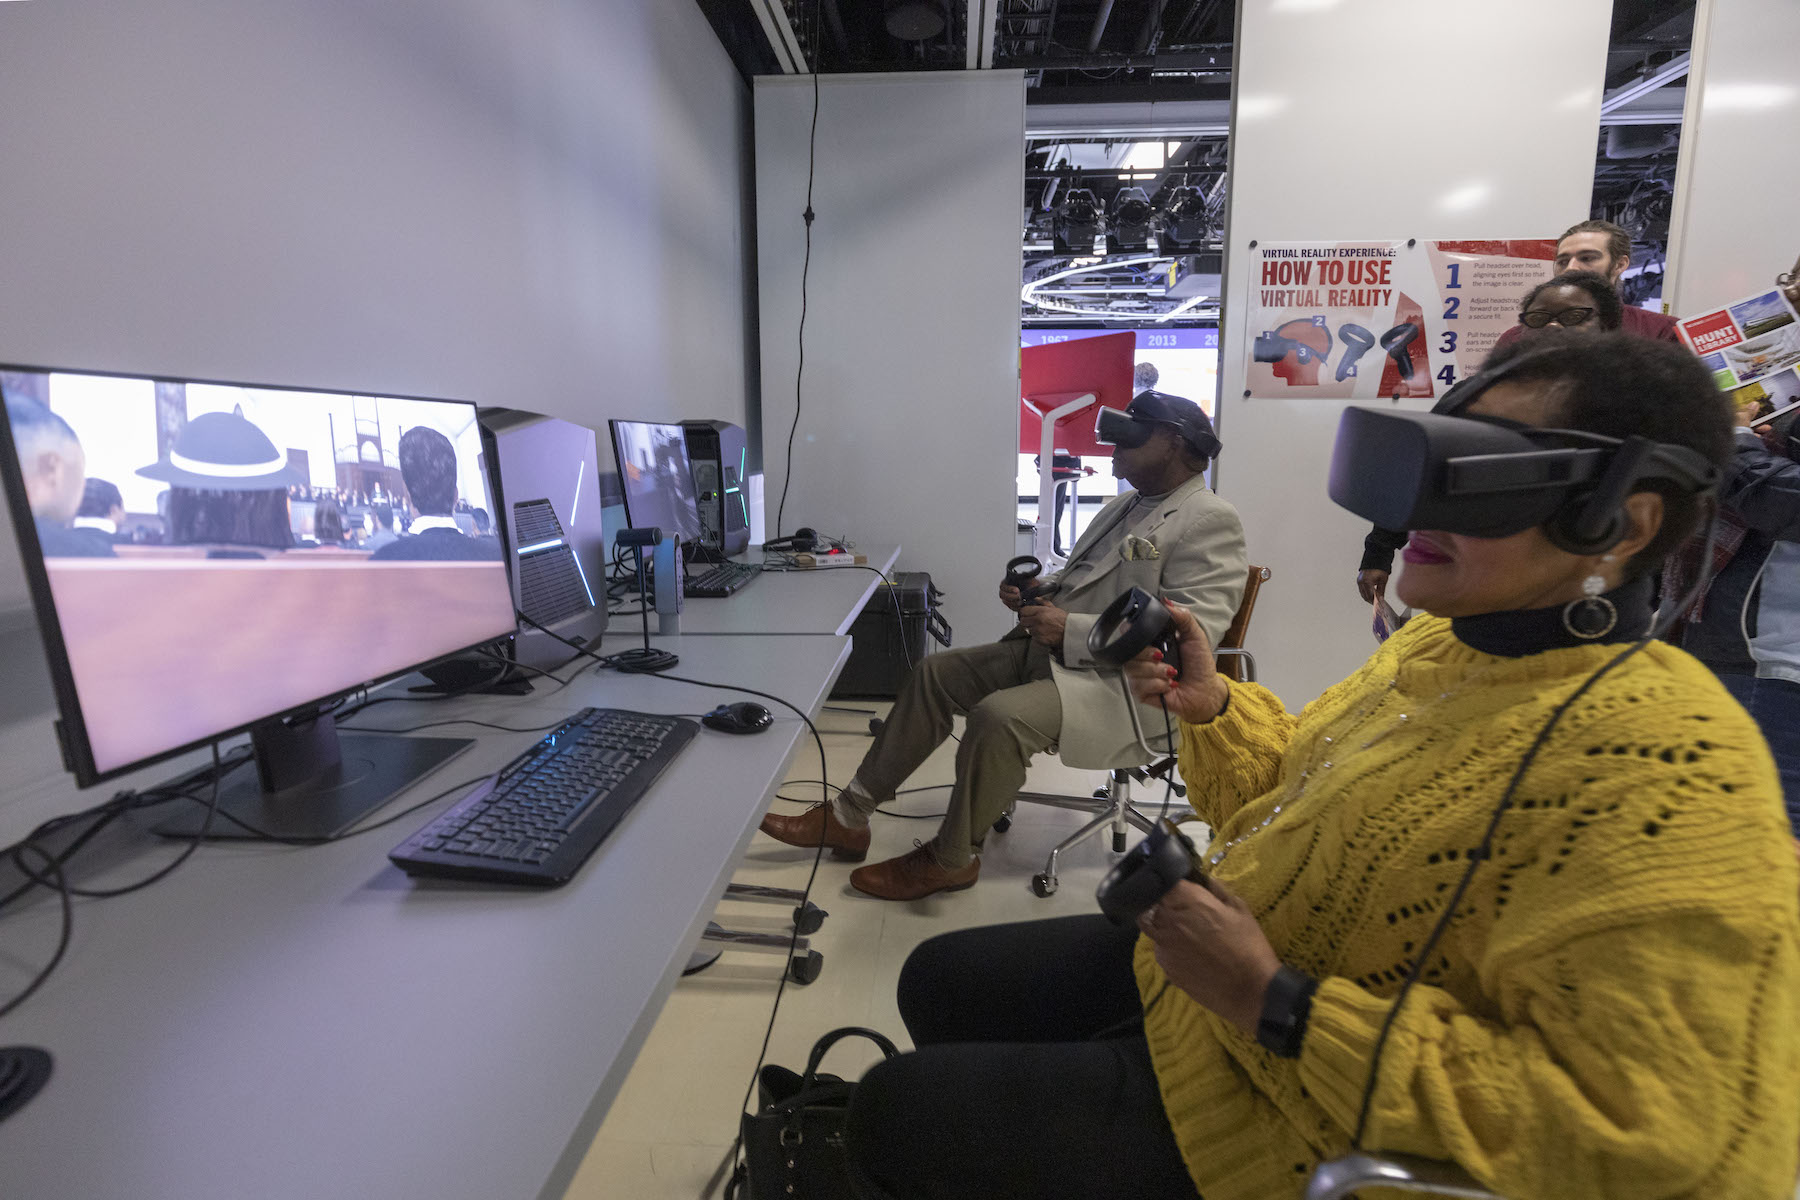 A person in a yellow sweater wearing a VR headset